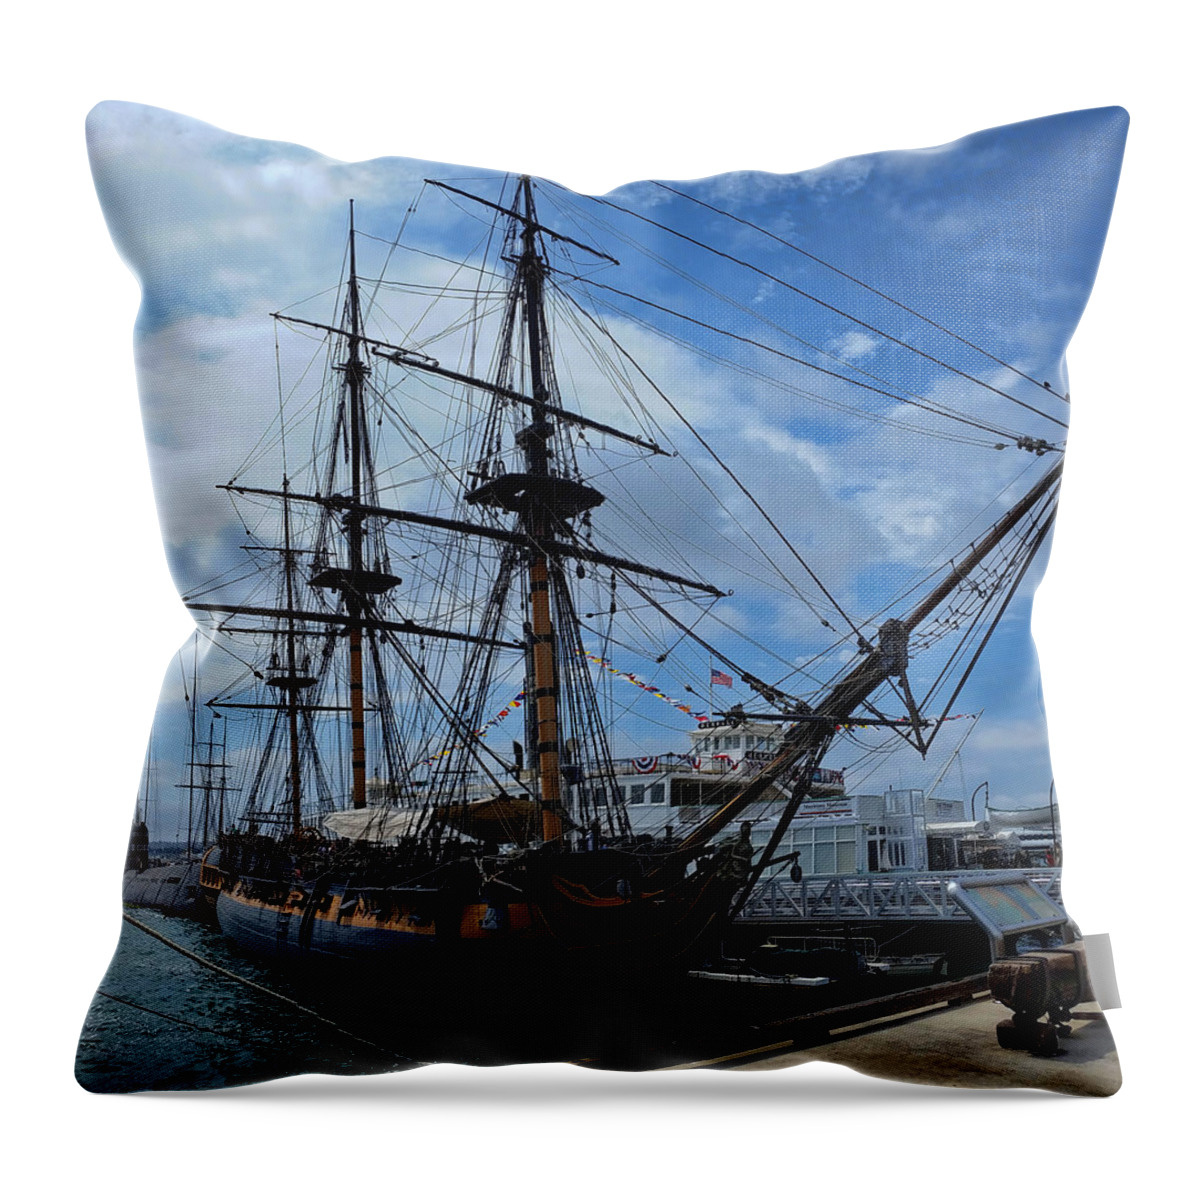 California Throw Pillow featuring the photograph HMS Surprise 2 by Tommy Anderson